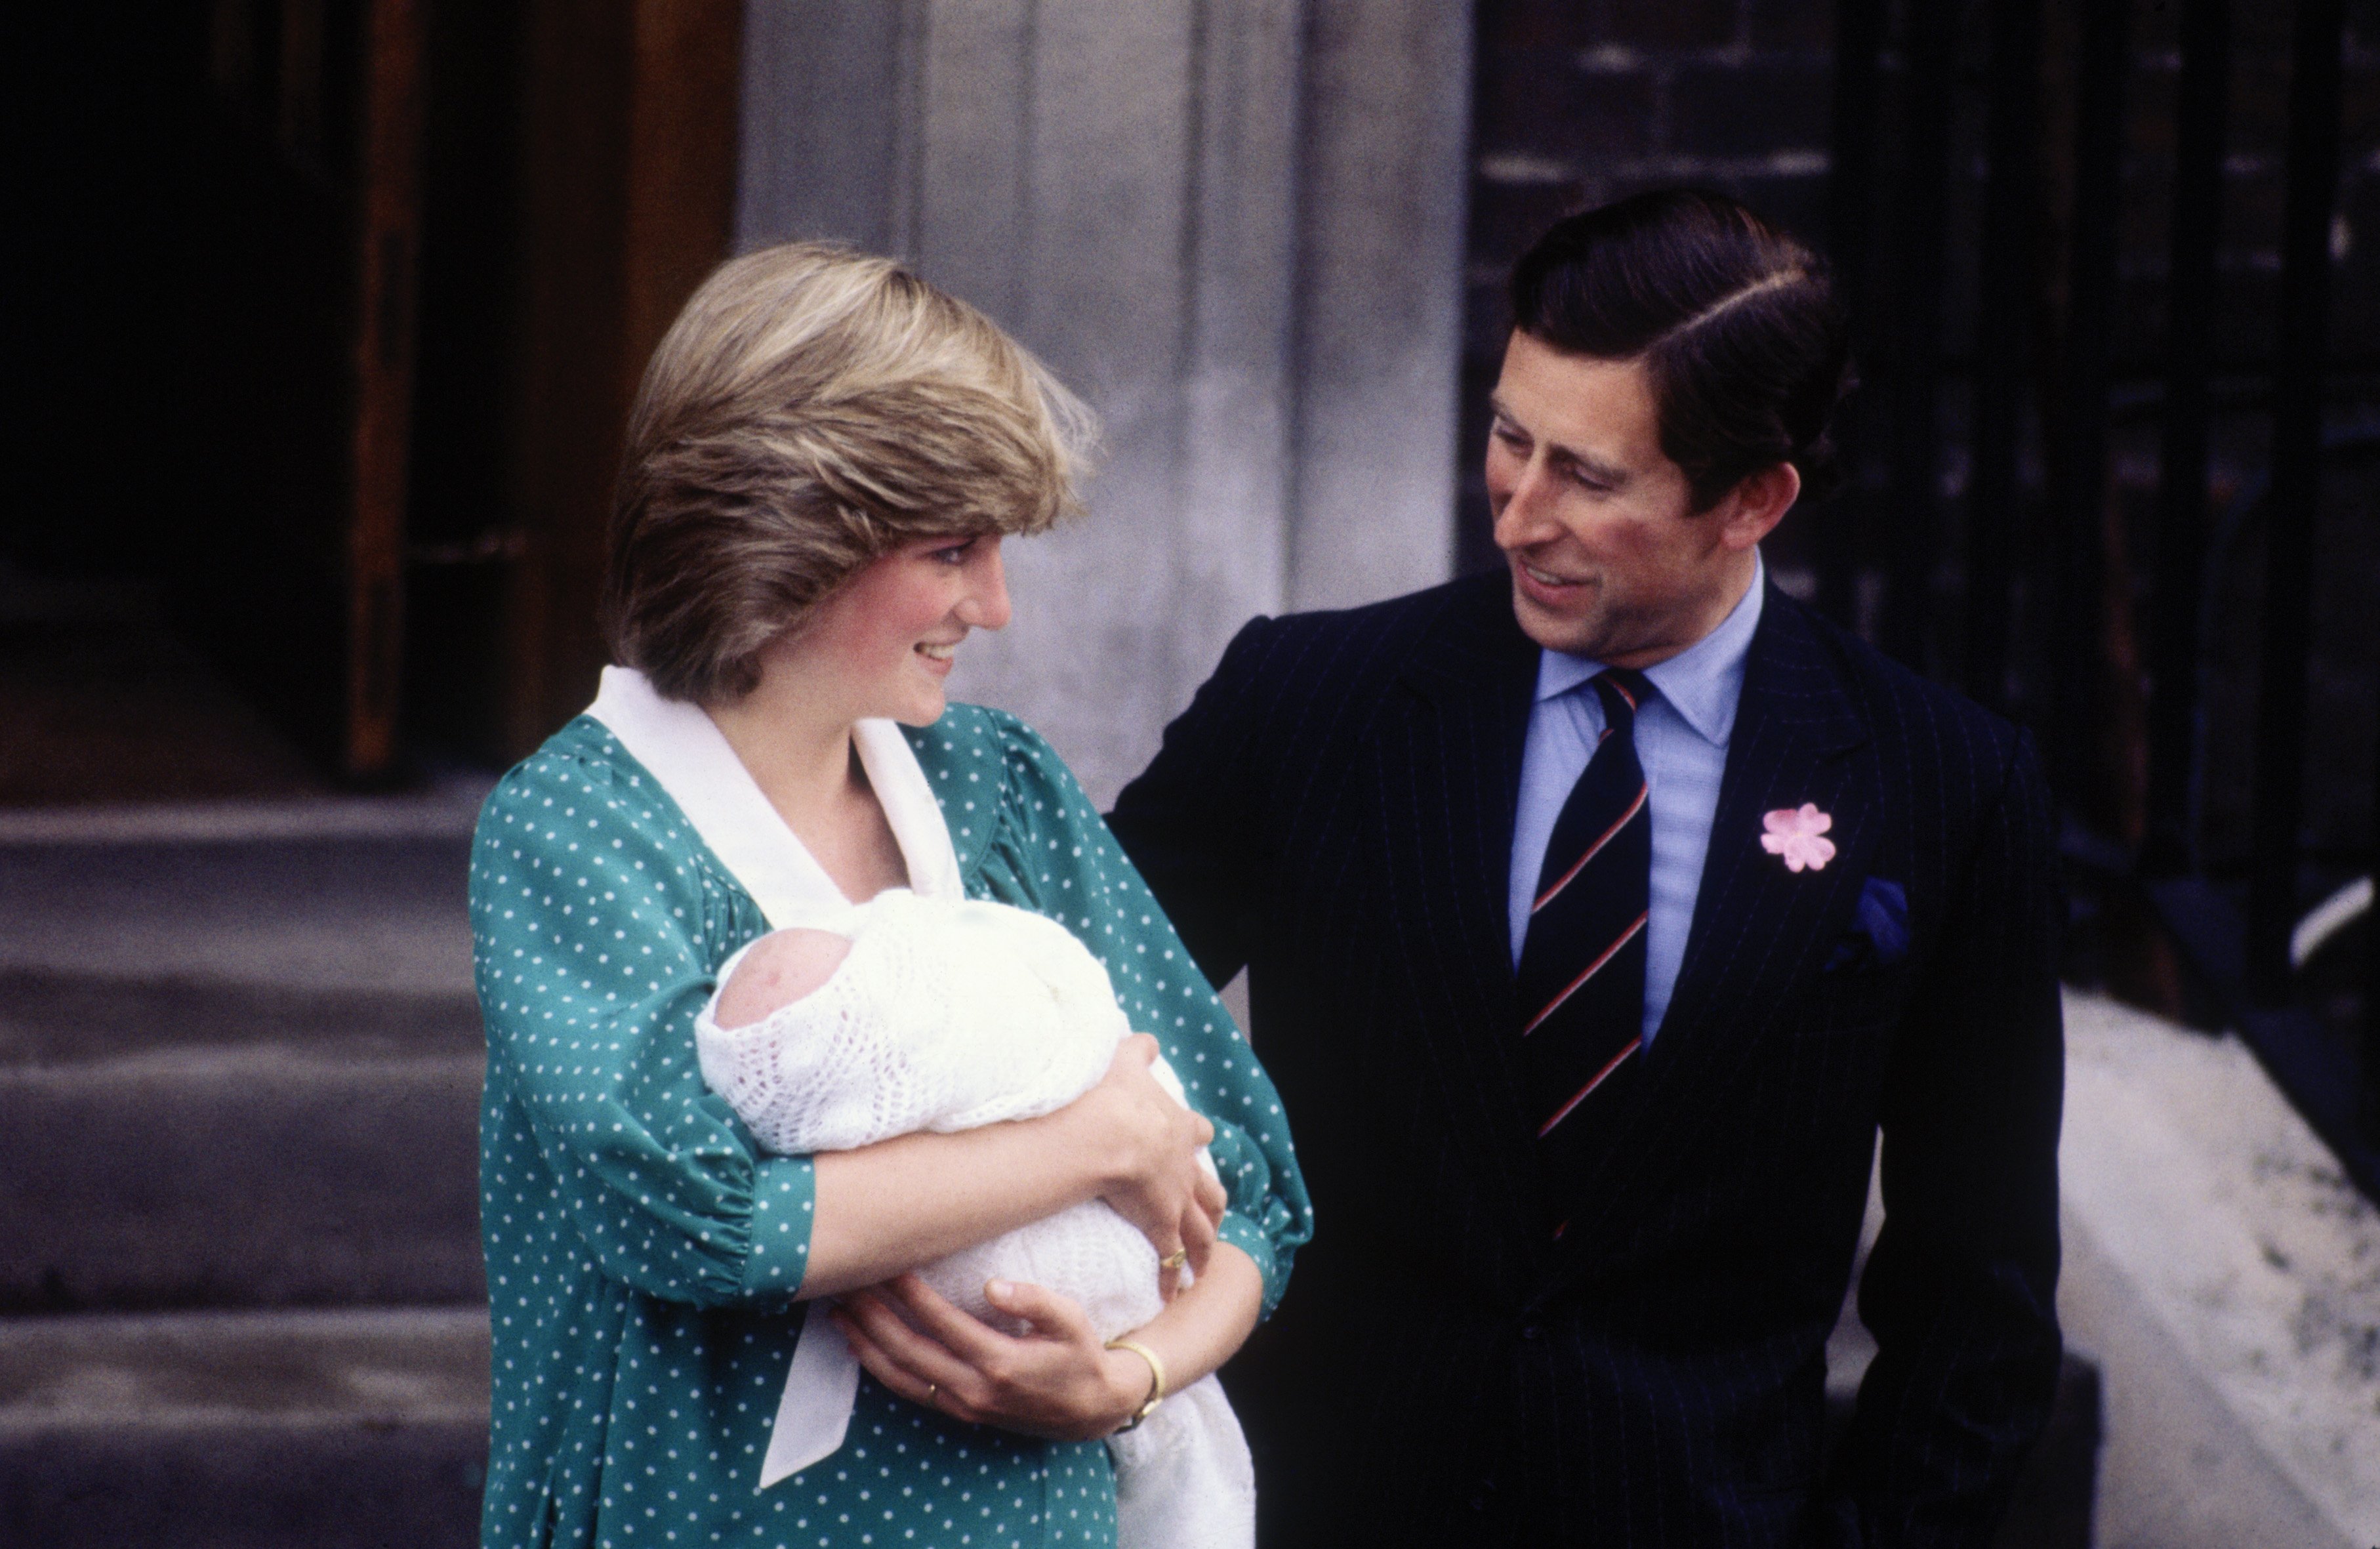 Princess Diana holding Prince William as Prince Charles looks on  | David Levenson/Getty Images